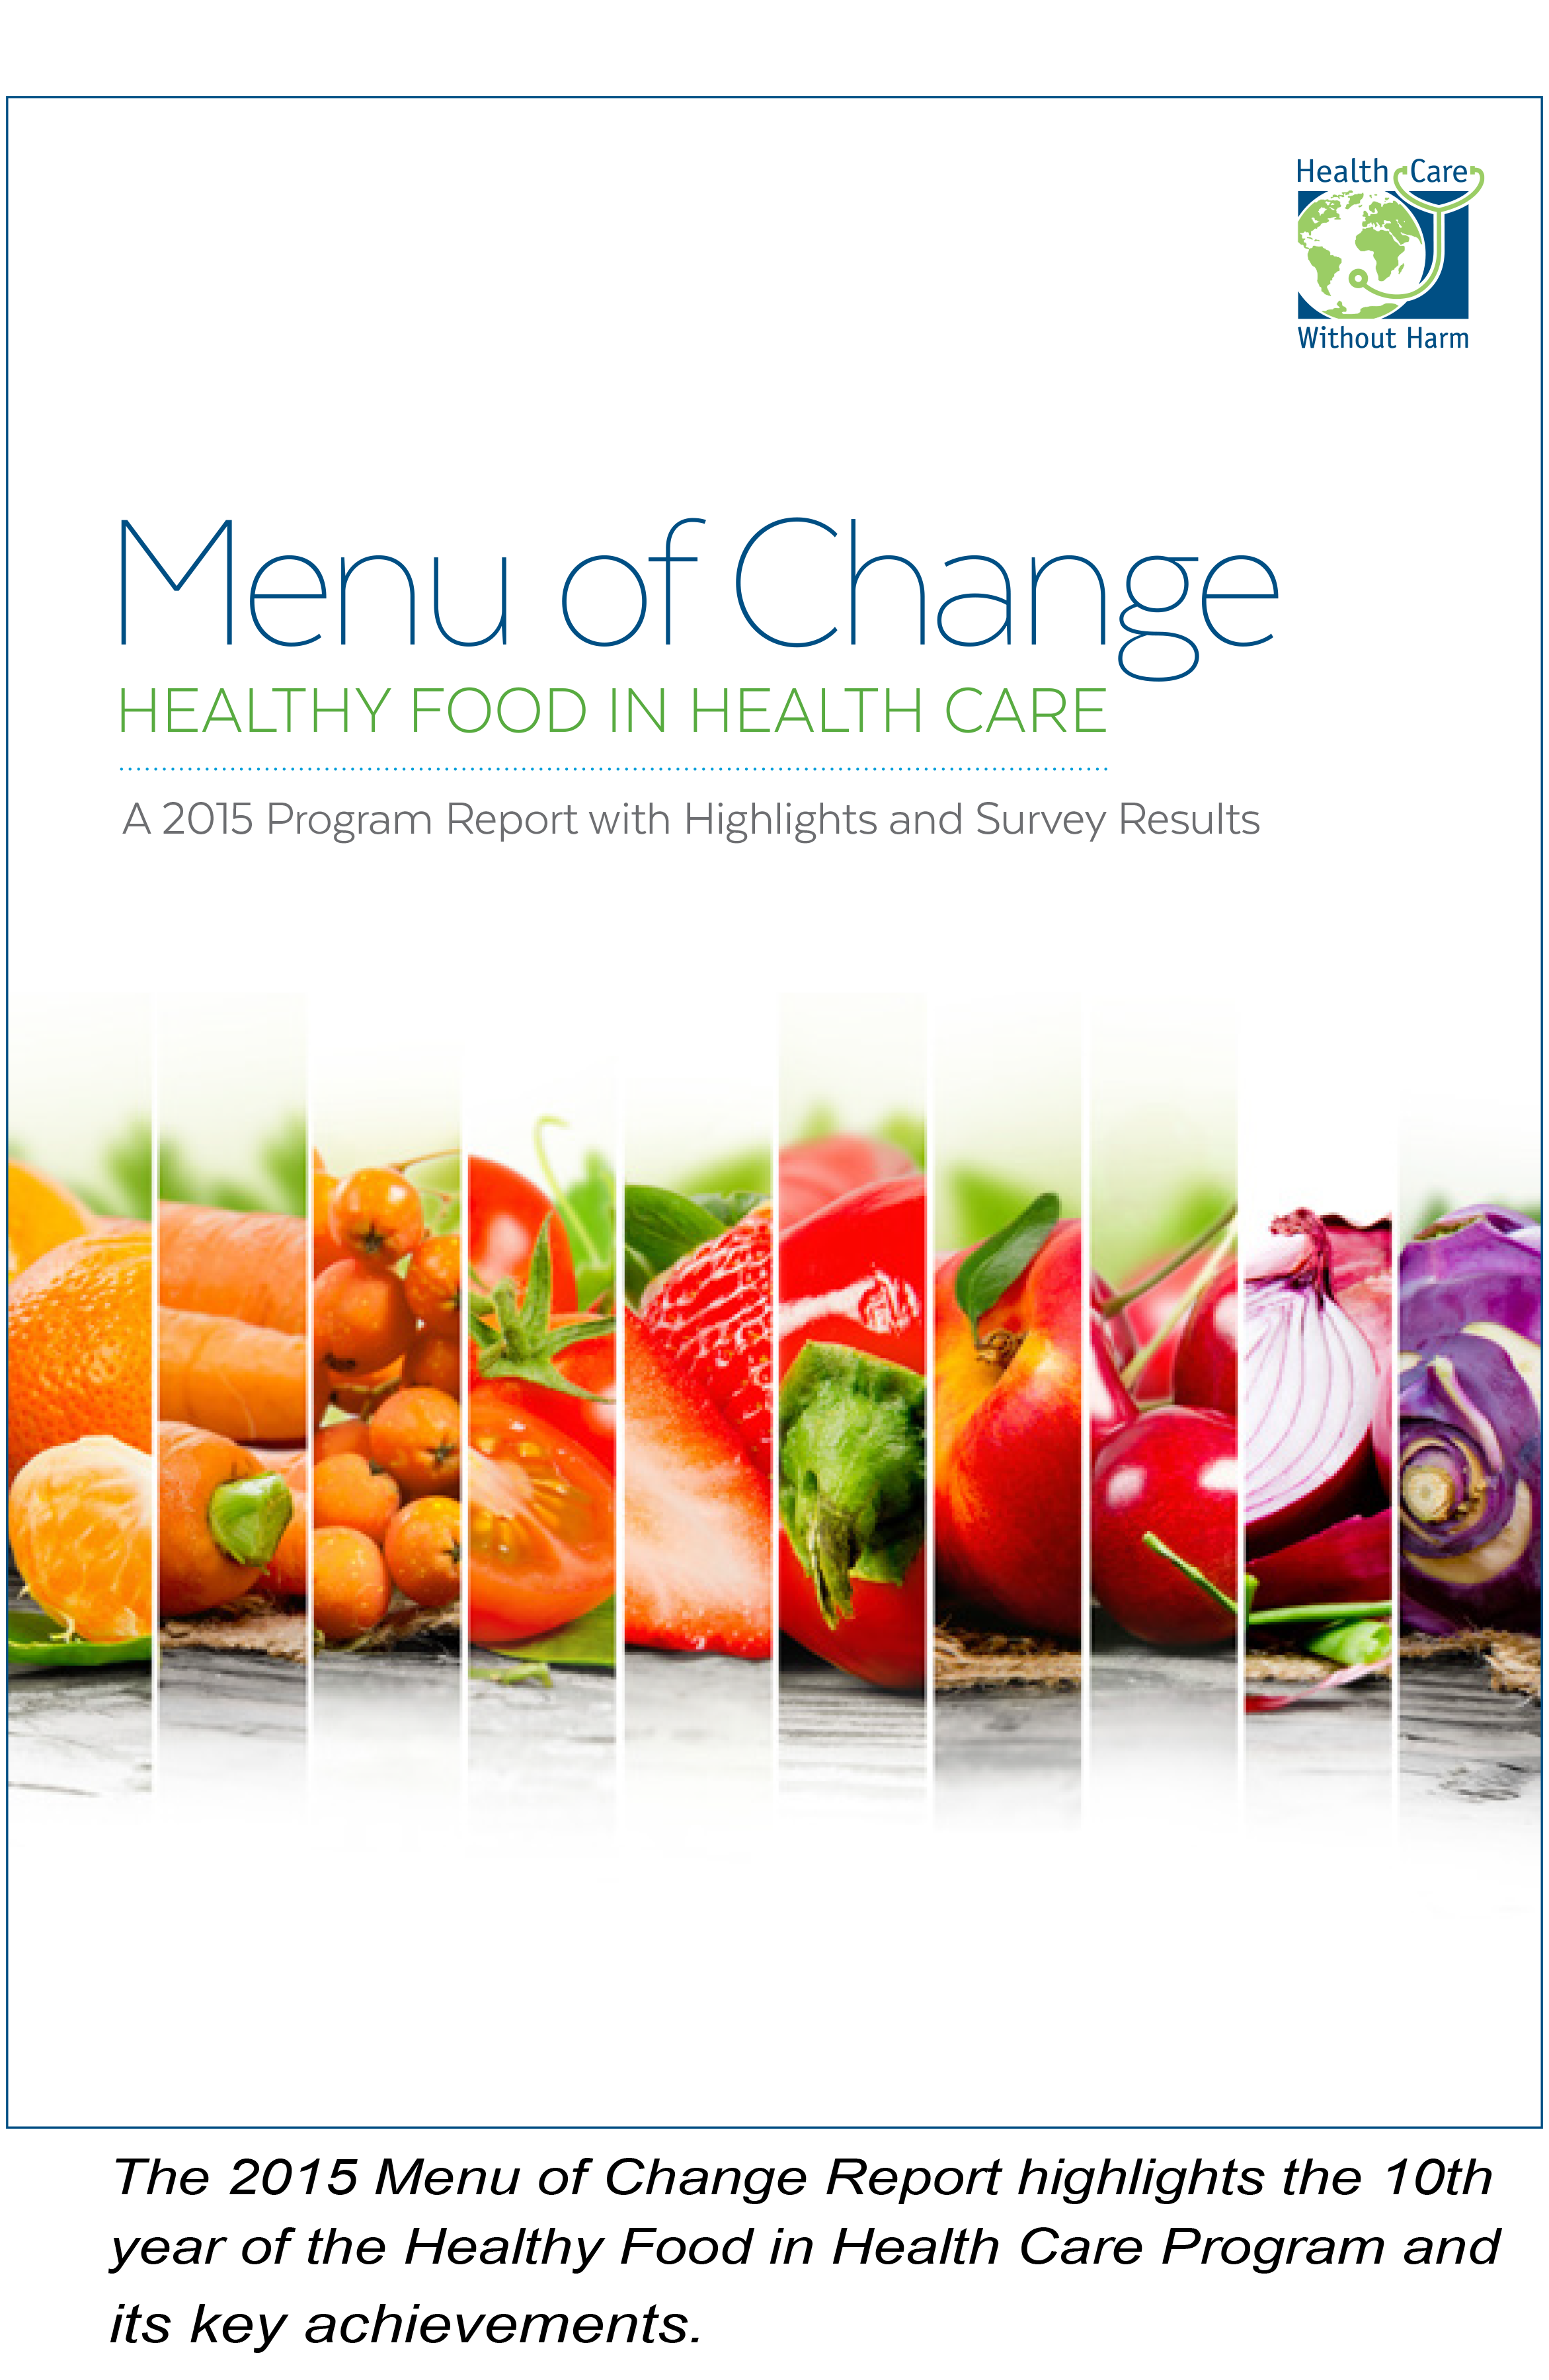 Healthy Food In Health Care Health Care Without Harm pertaining to Healthy Food For Health